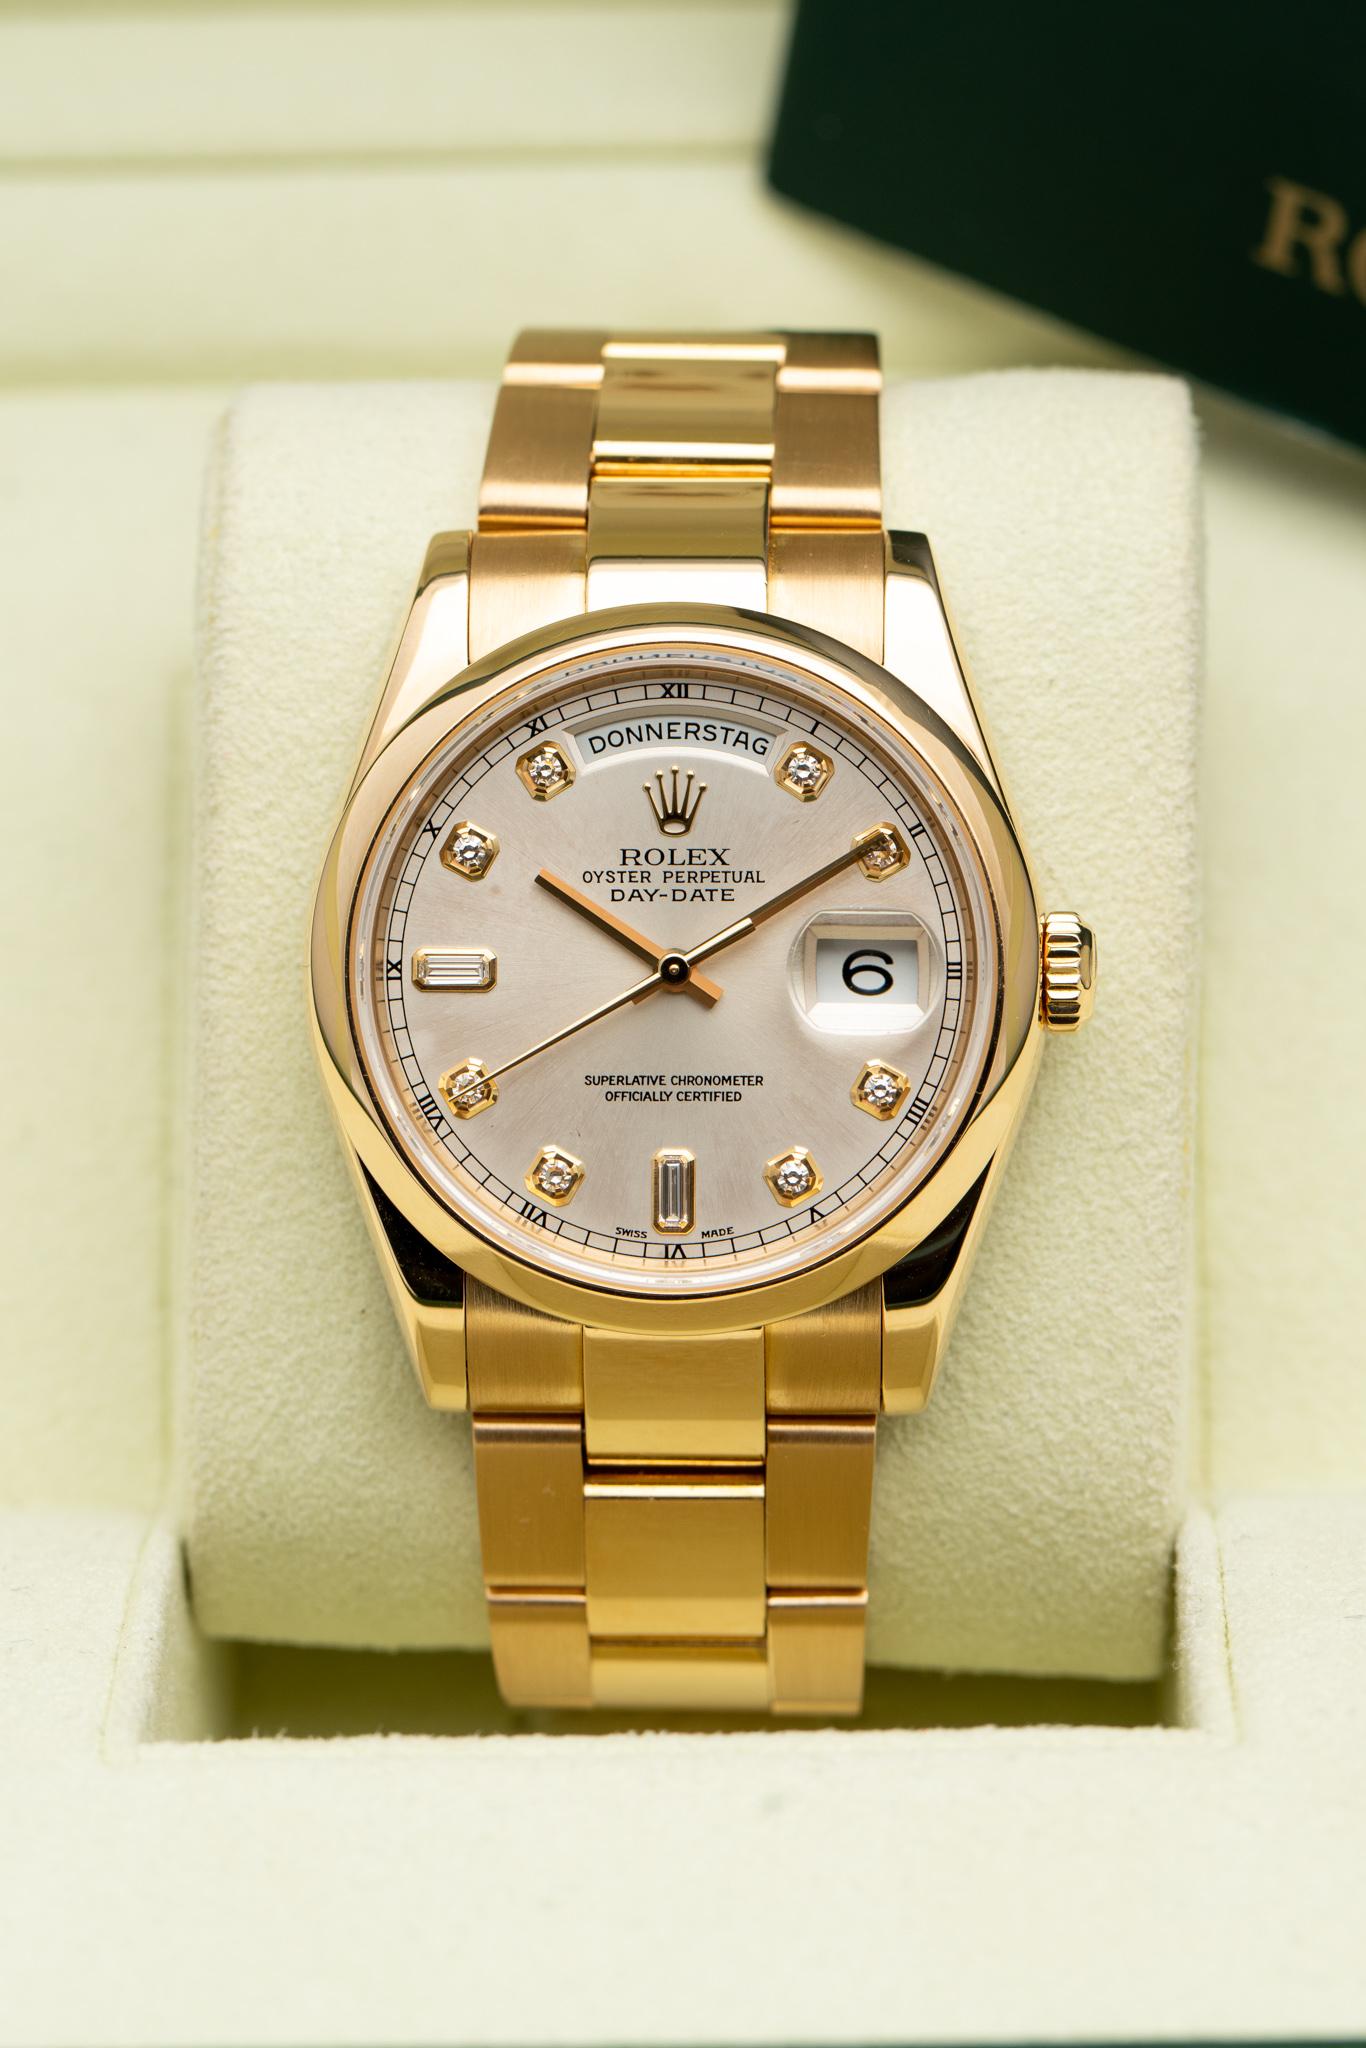 The watch is in a very good condition, it has professional polish and it’s working well. It comes with the original Rolex box, along with a 12 months AGS Jewelry warranty card. For more information about delivery, warranty and return, please check